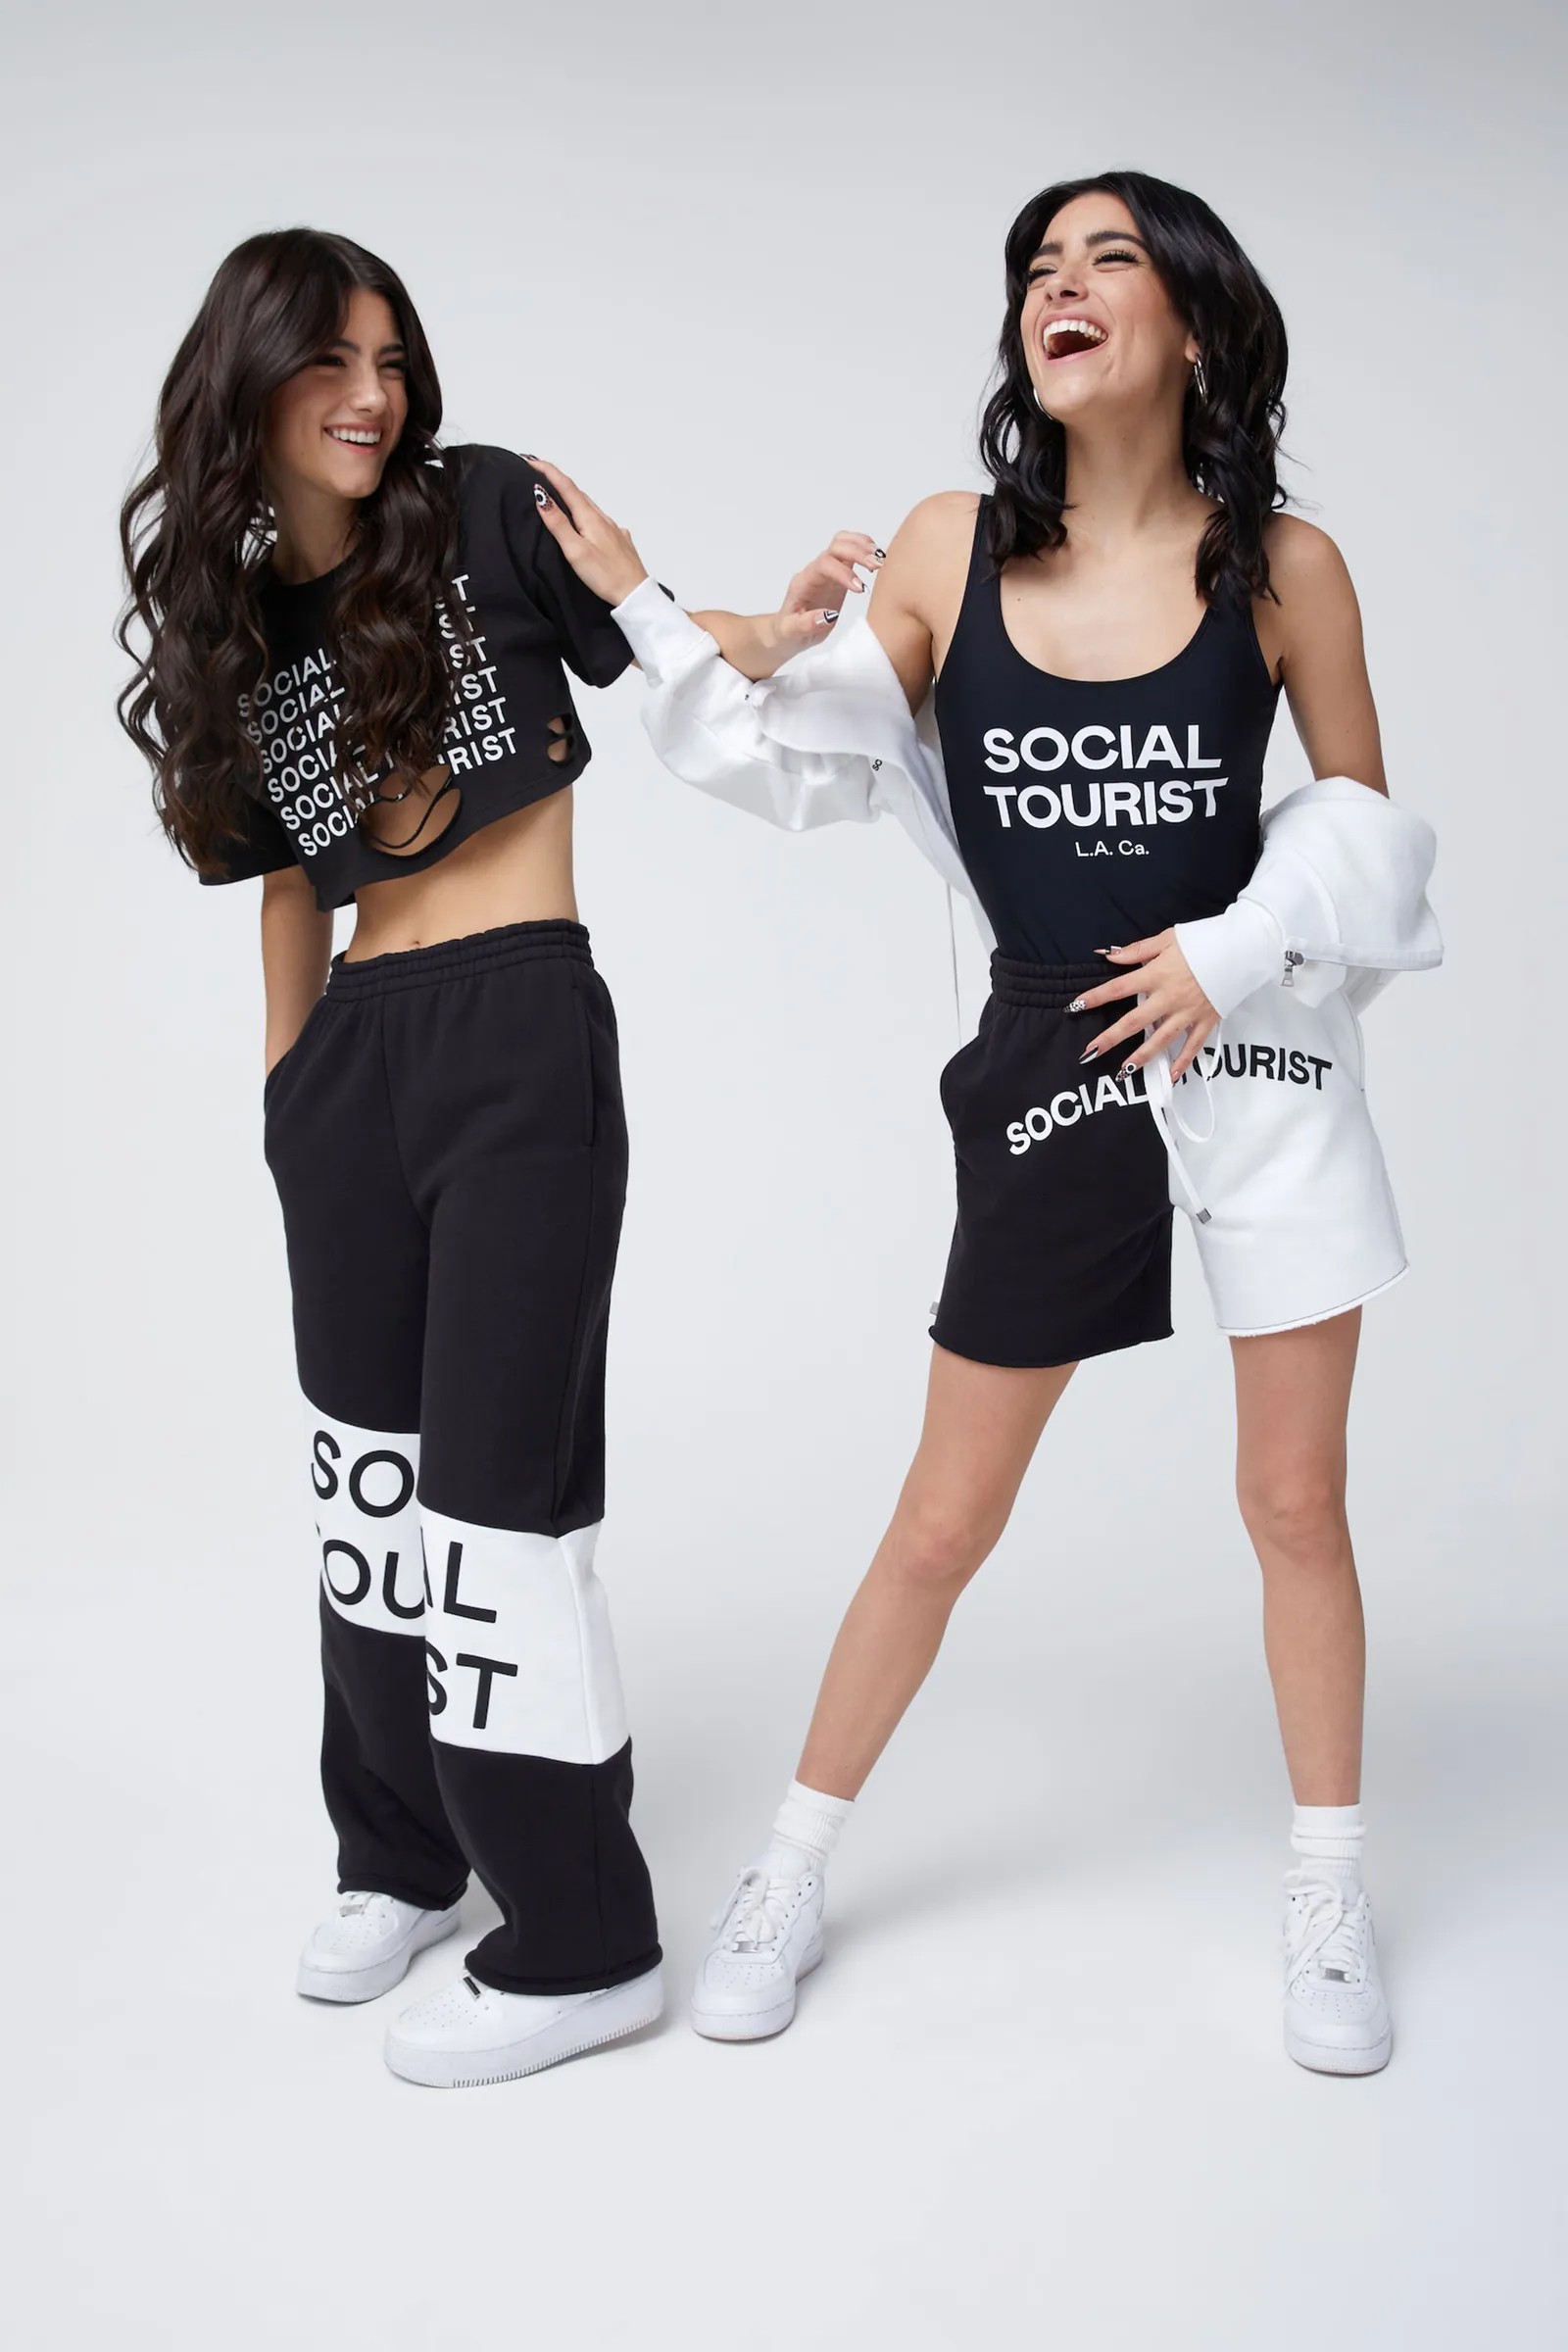 Social Tourist by Charli and Dixie D’Amelio, launched in 2021 (Foto: Reprodução/ Social Tourist by Charli and Dixie D’Amelio)